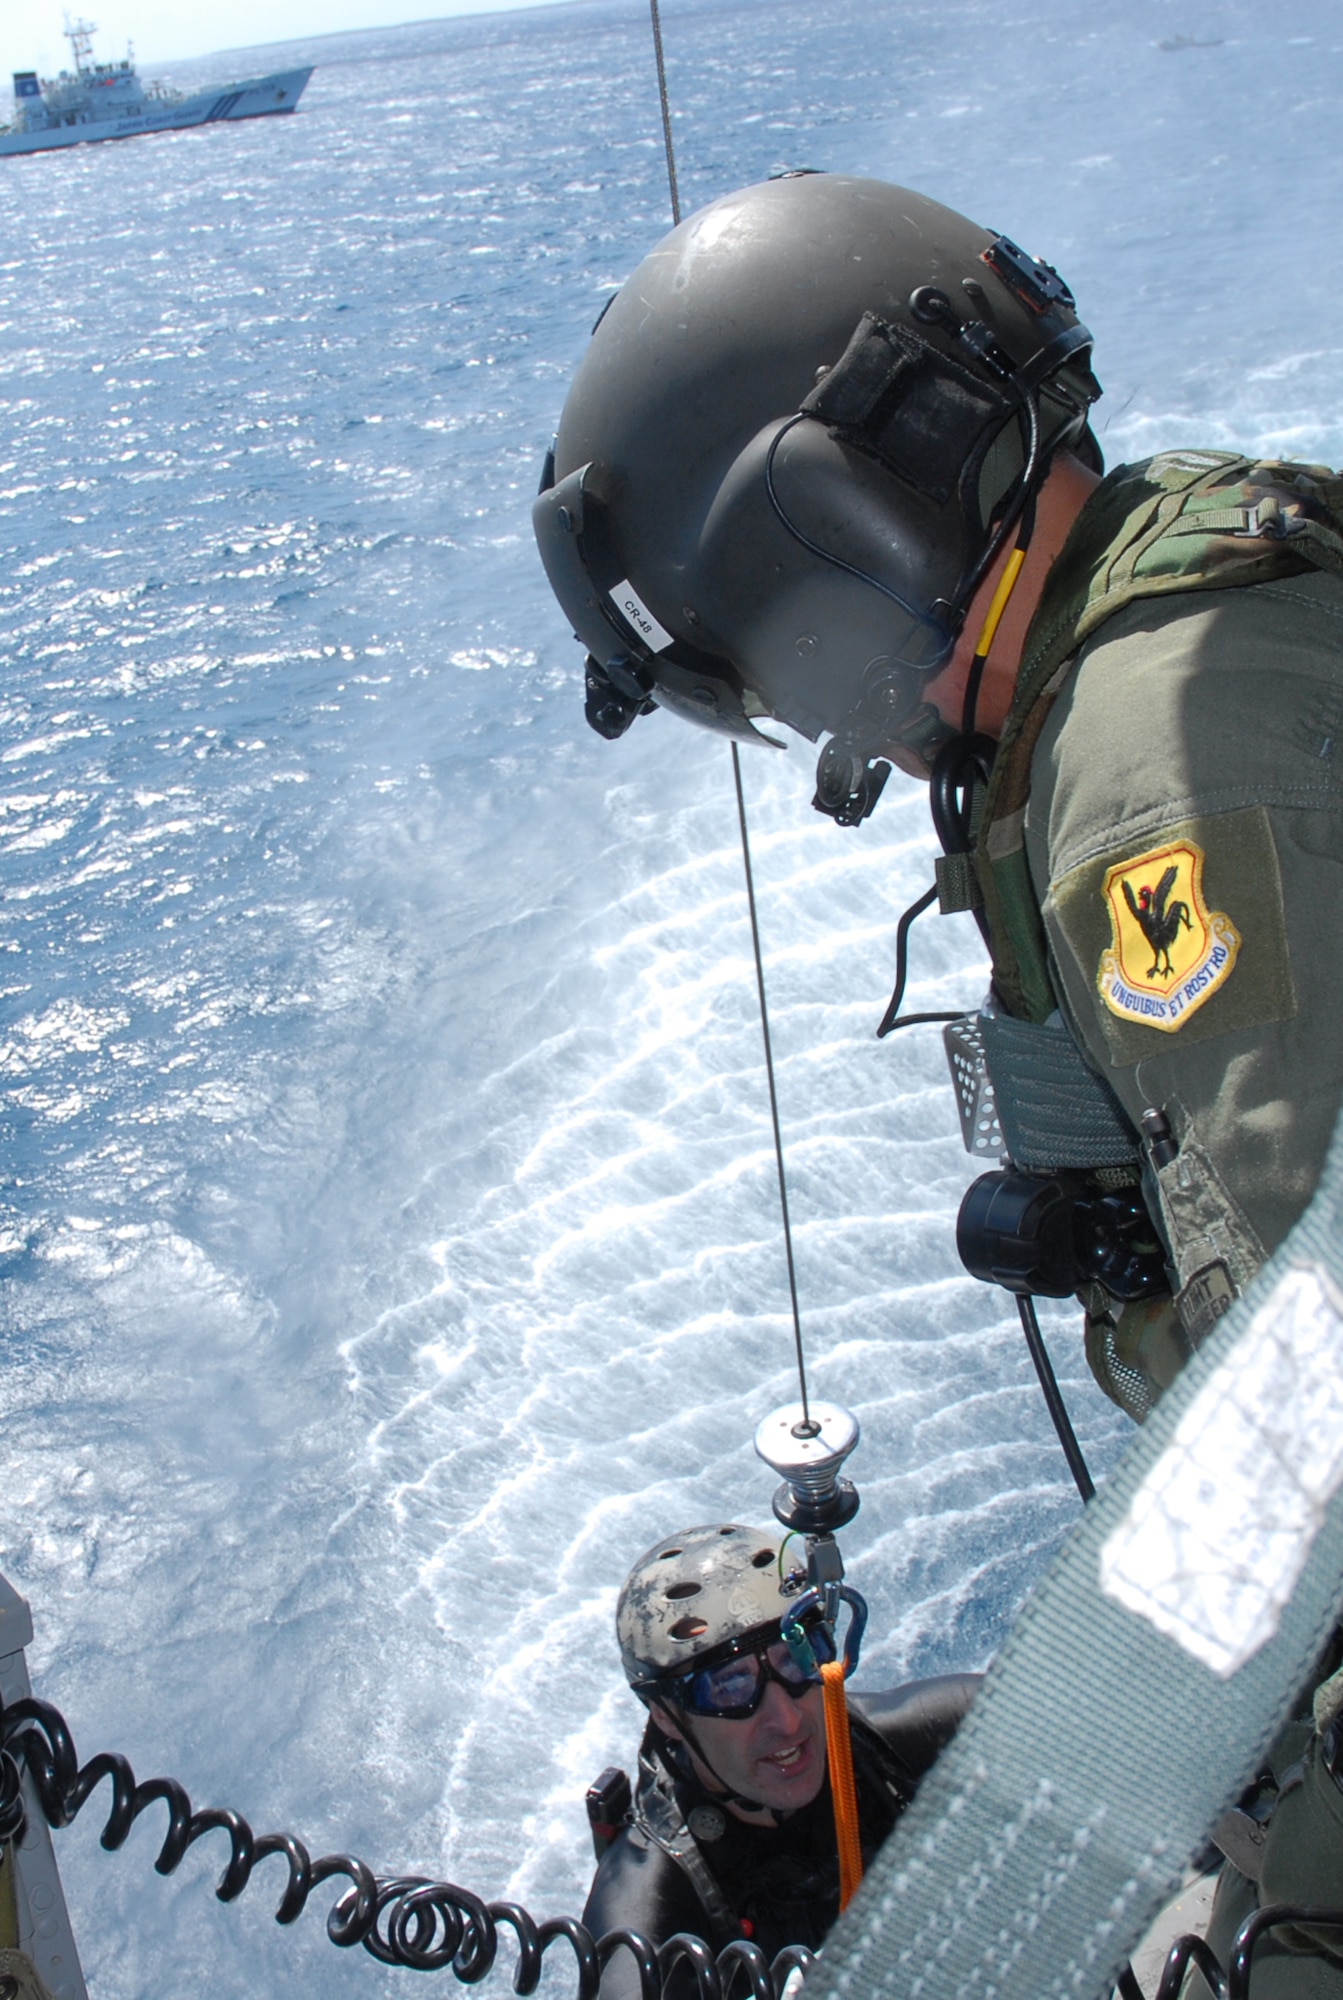 Staff Sgt. Jonathan Courtright, a Pararescue Airman  assigned to the 31st Rescue Squadron is hoisted up onboard an HH-60 by Master Sgt. Ernest Garcia, flight engineer assigned to the 33rd Rescue Squadron, after rescuing a downed F-15 pilot as part of a crisis management exercise off the coast of Okinawa, Oct. 8, 2008. Members of the 18th Wing and Japanese Coast Guard rehearsed response procedures for a simulated over the water aircraft accident. (U.S. Air Force photo/Staff Sgt. Chrissy Best)
